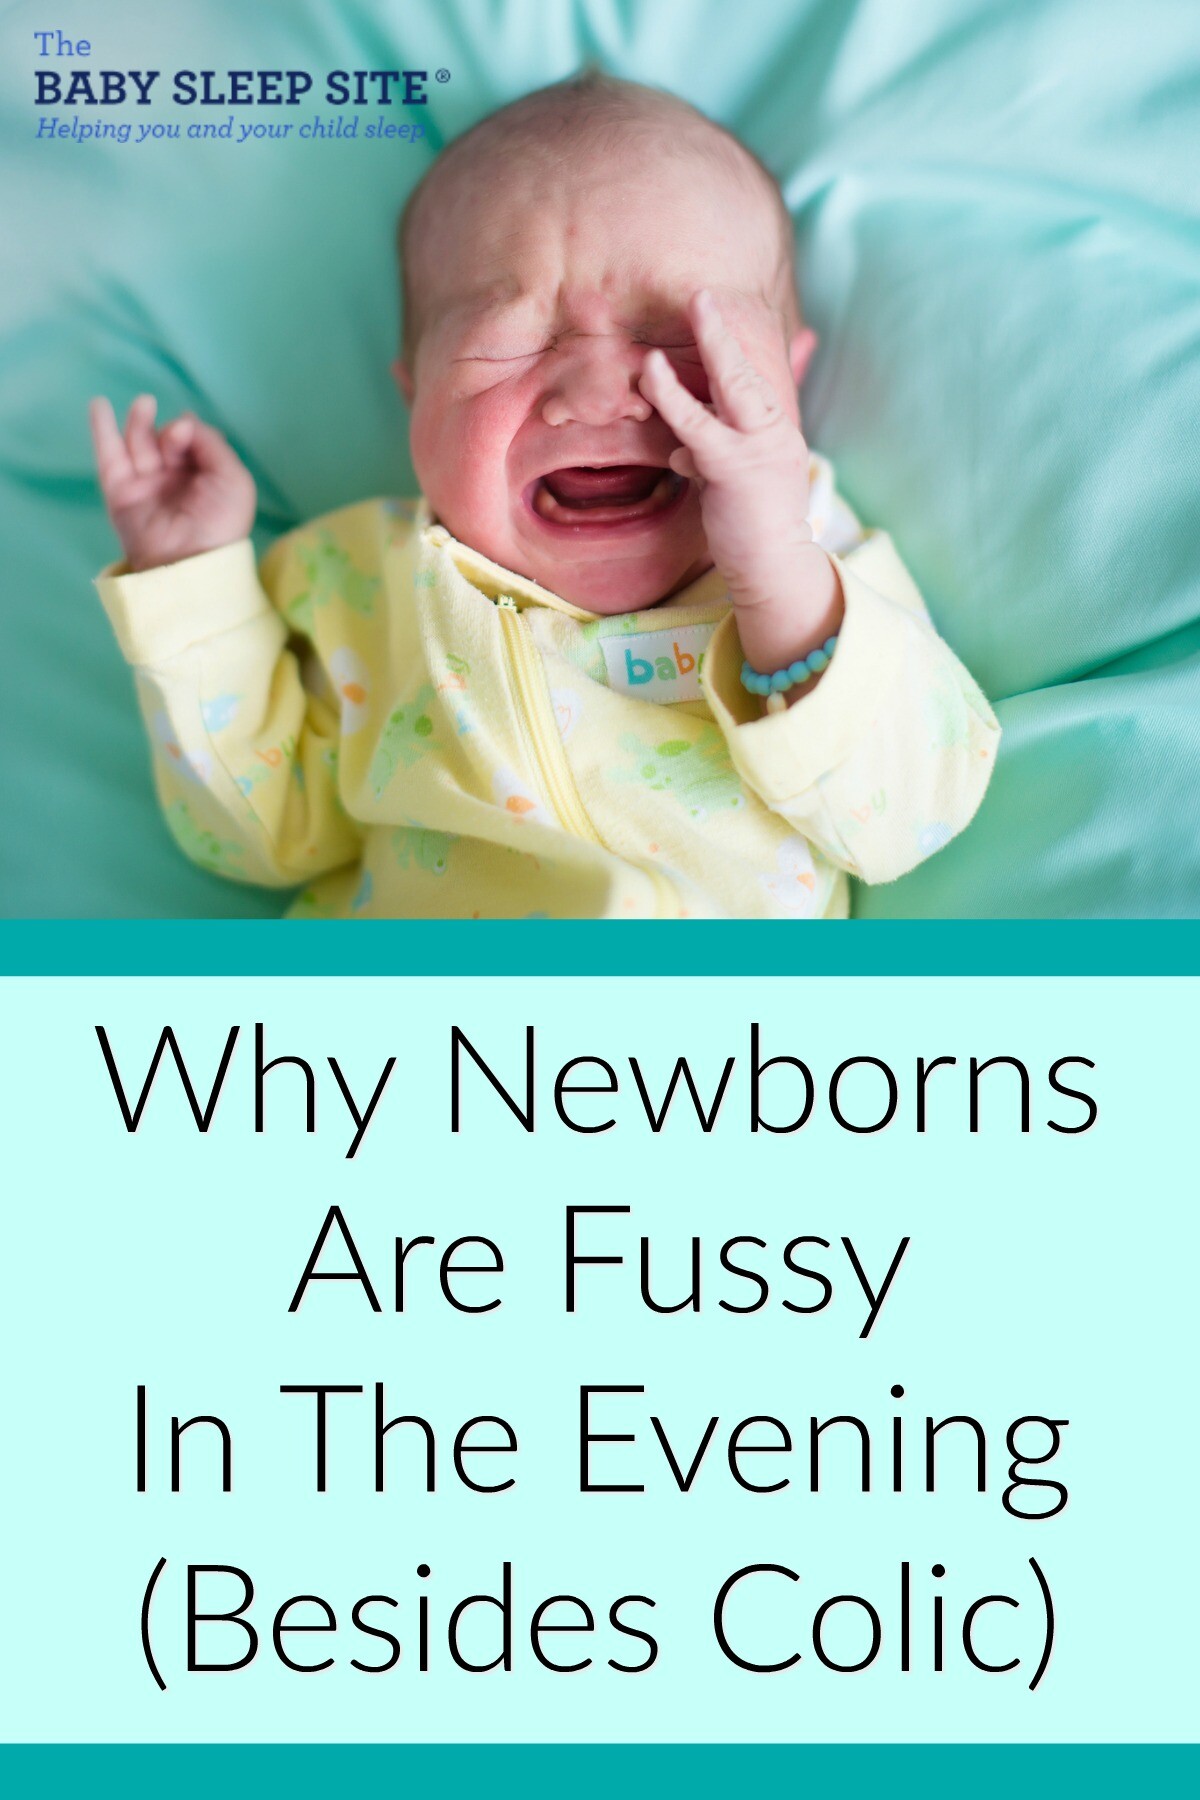 baby gets fussy in the evening